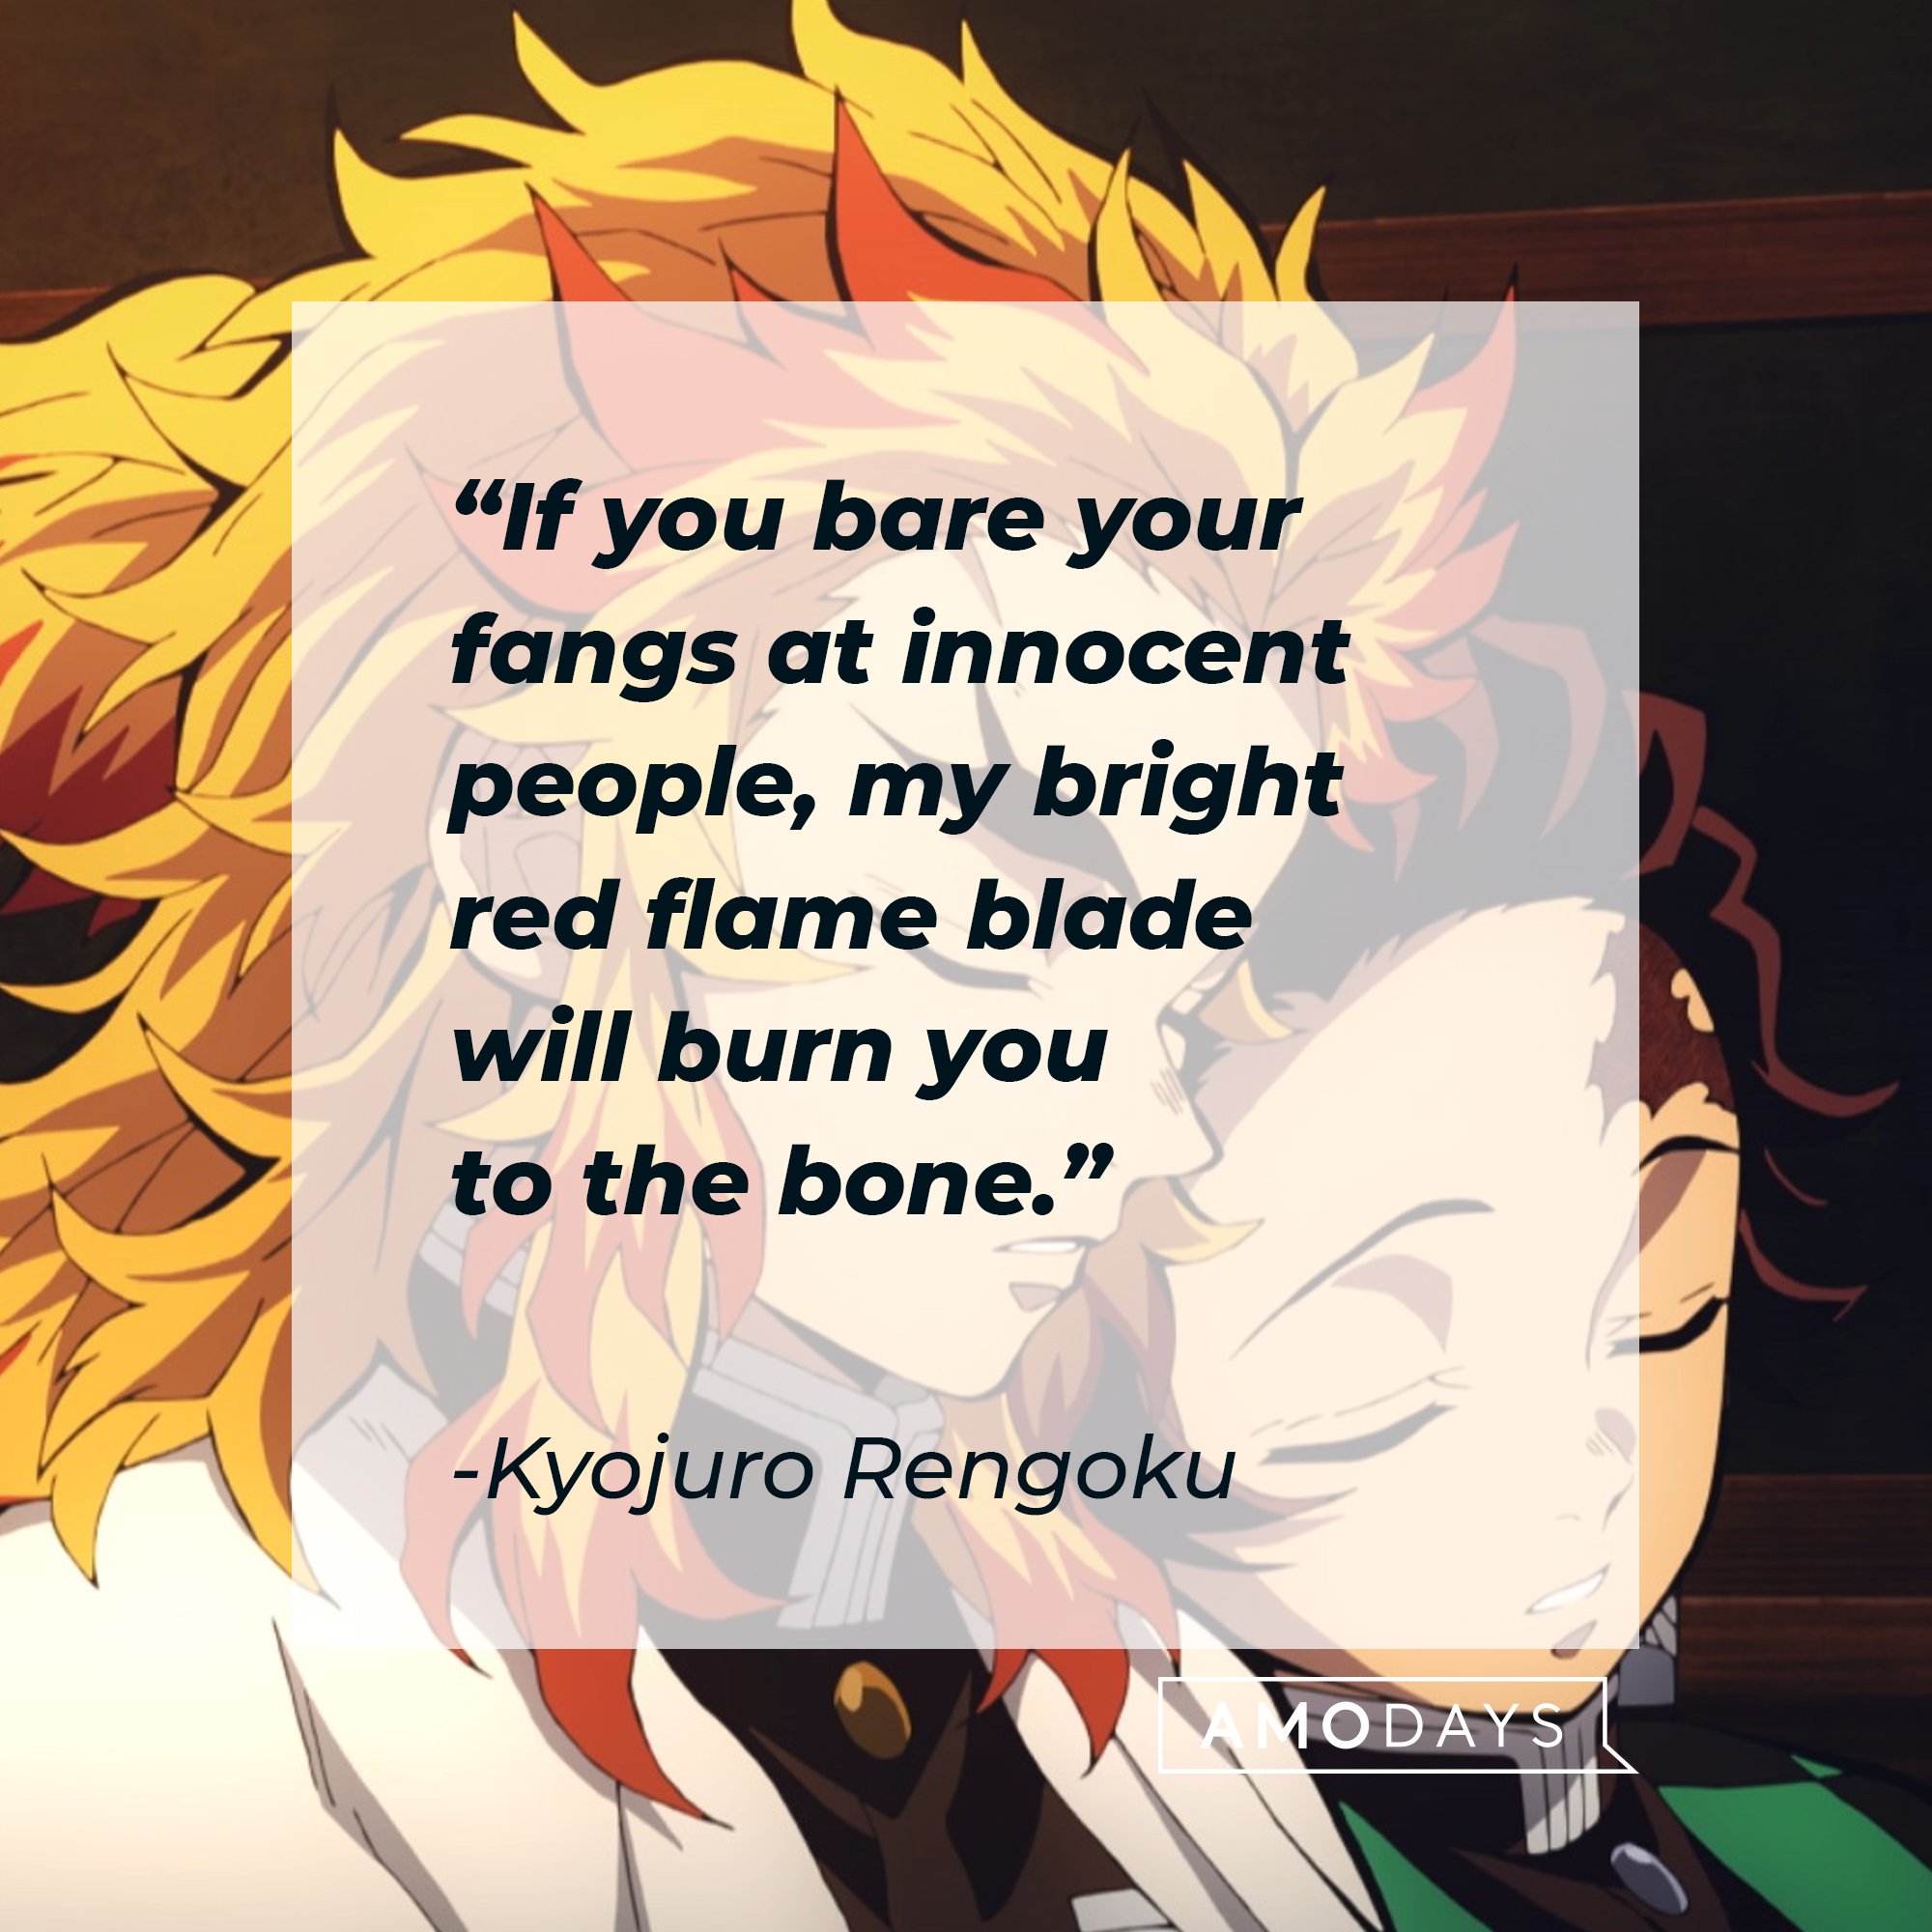 Kyojuro Rengoku’s quote: “If you bare your fangs at innocent people, my bright red flame blade will burn you to the bone.” | Image: AmoDays